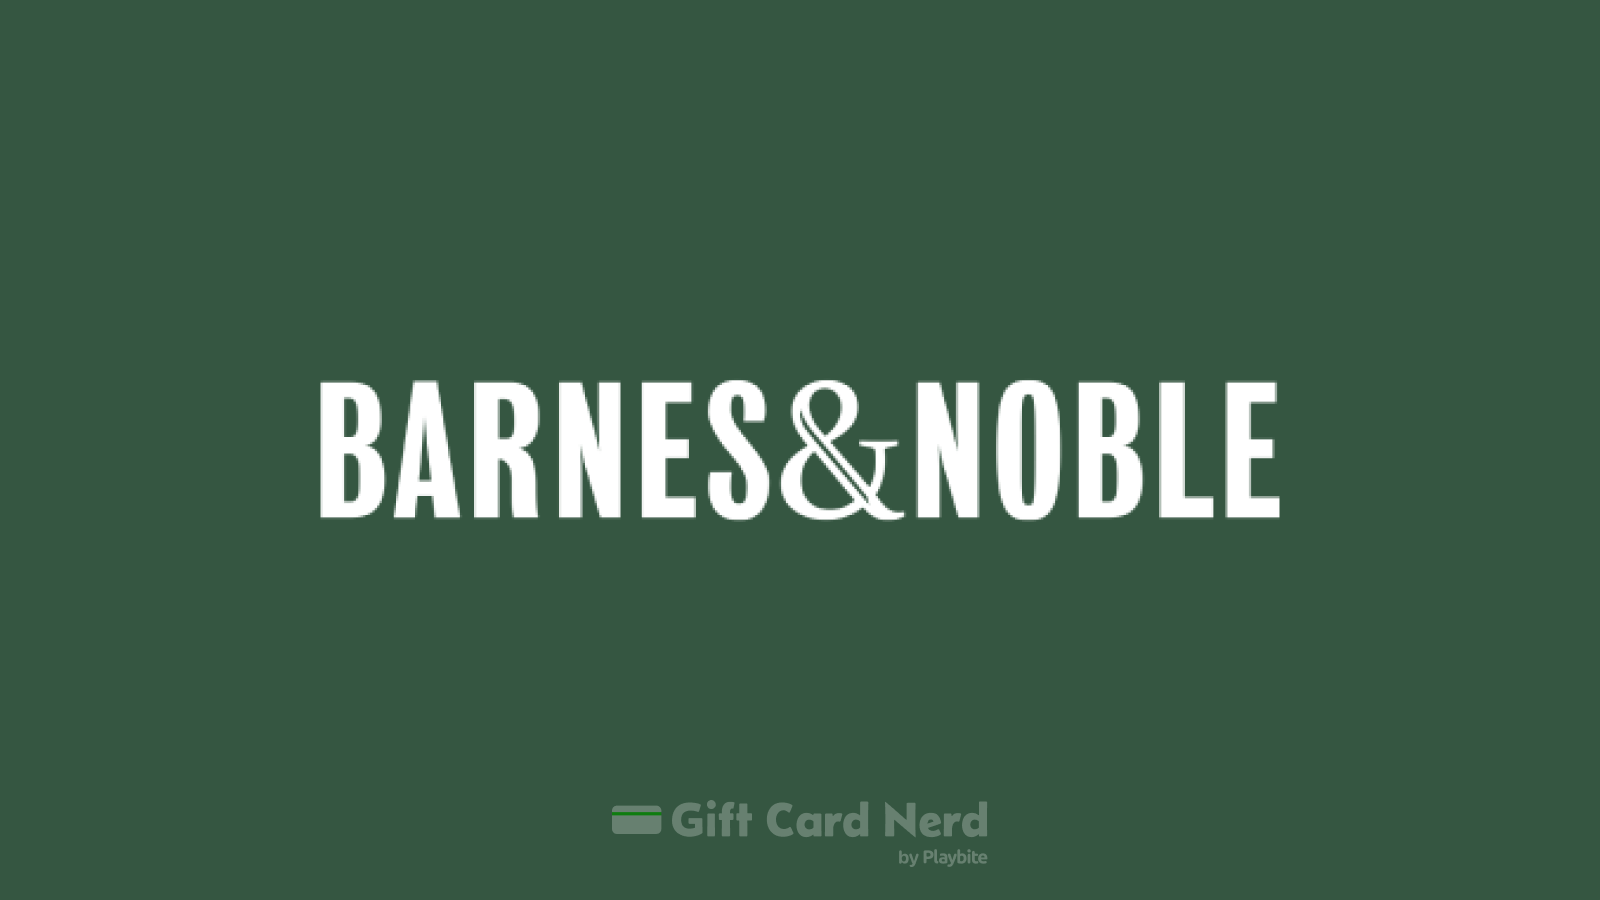 Can I use a Barnes and Noble gift card on Roblox?